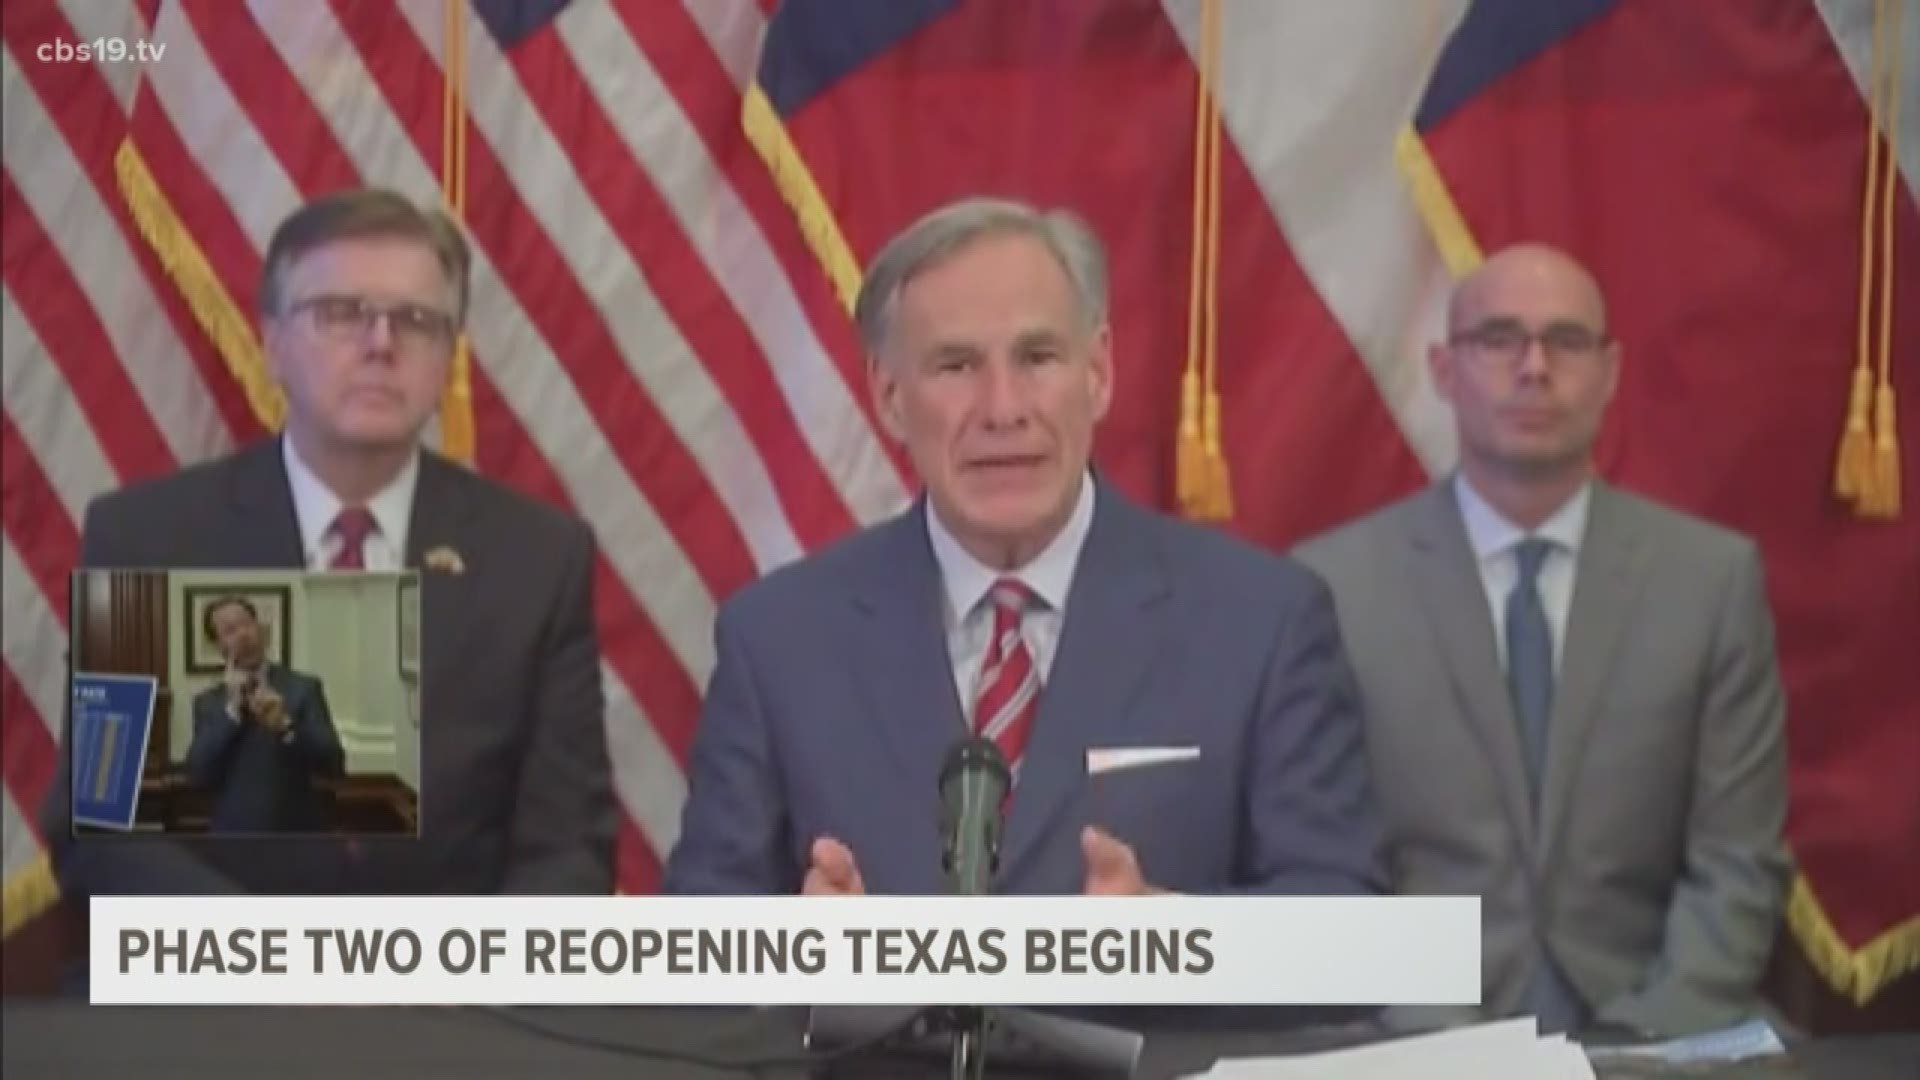 Gov. Abbott announced Monday his plan from phase two of reopening the state of Texas.